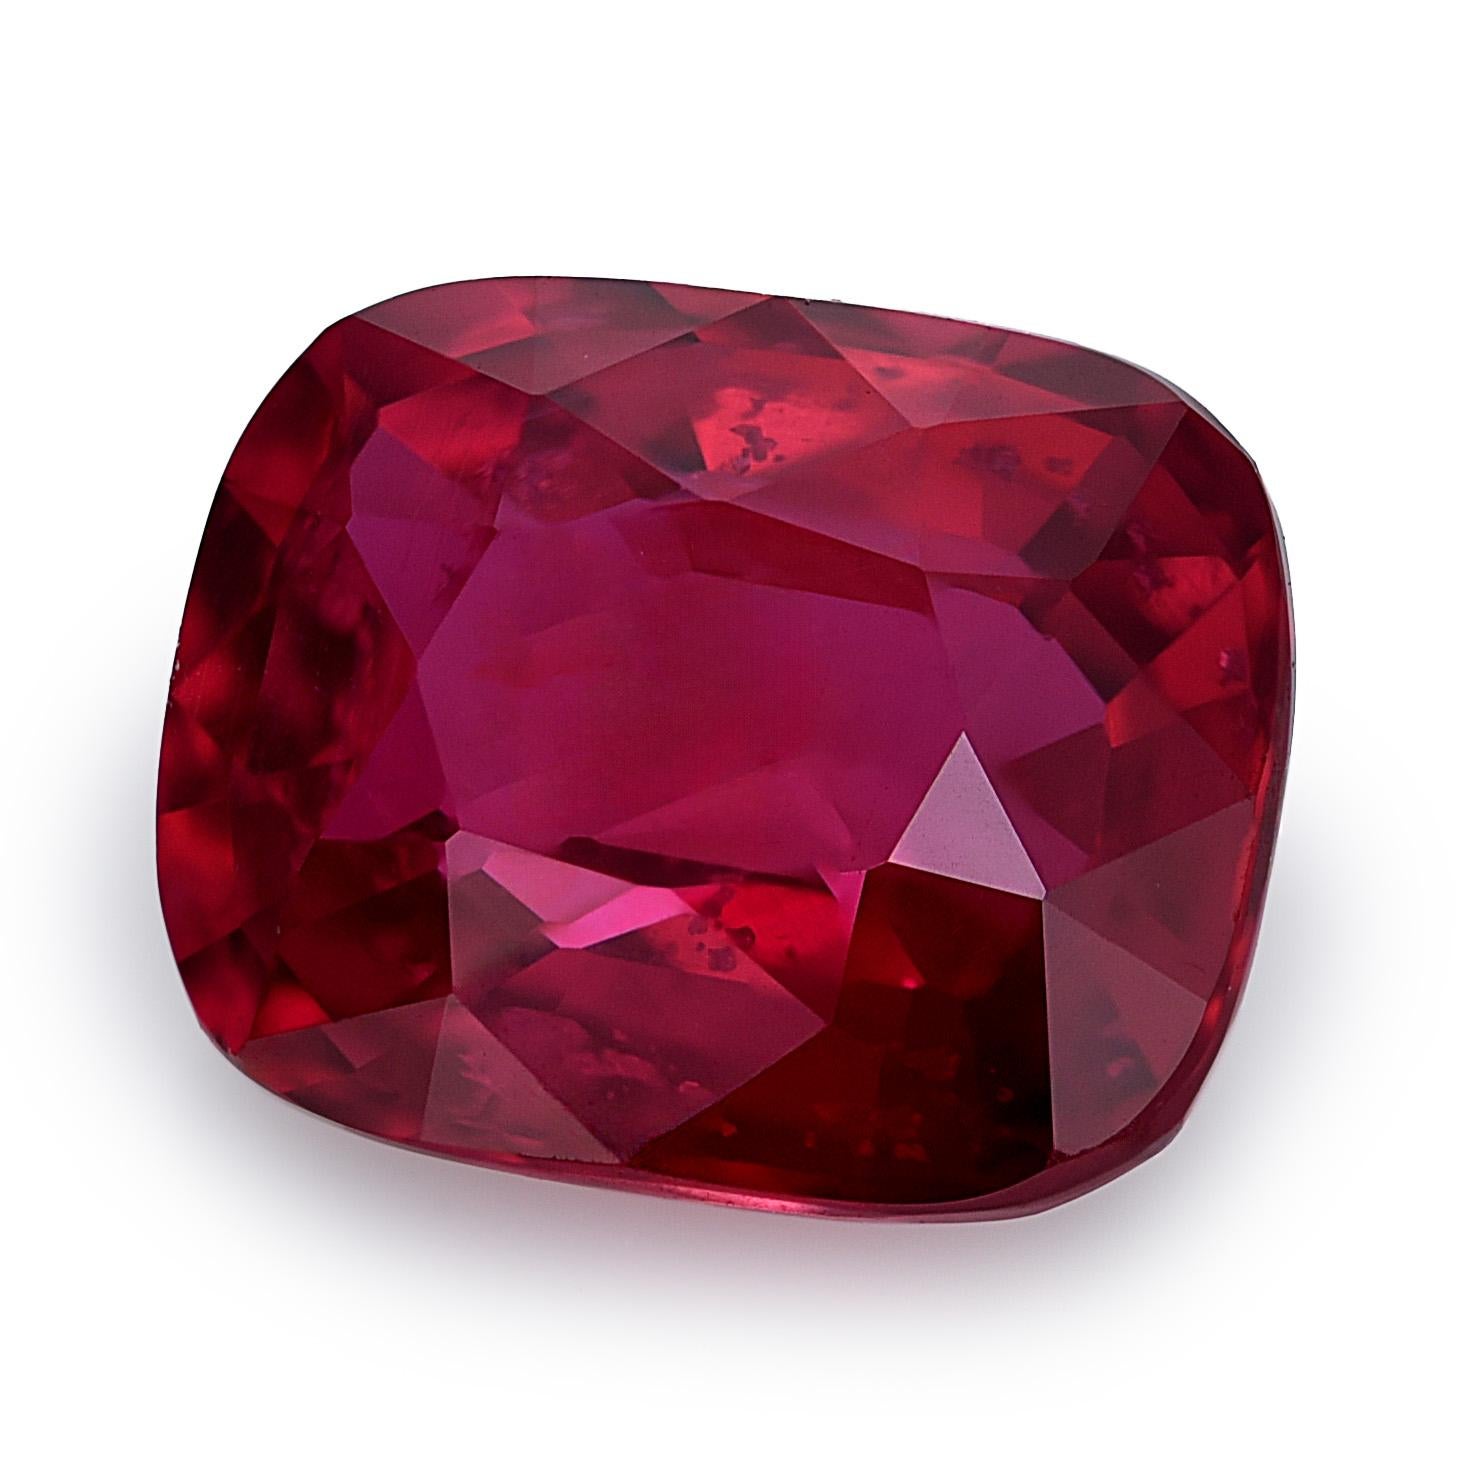 Mixed Cut GIA Certified 1.31 Carats Unheated Mozambique Ruby For Sale